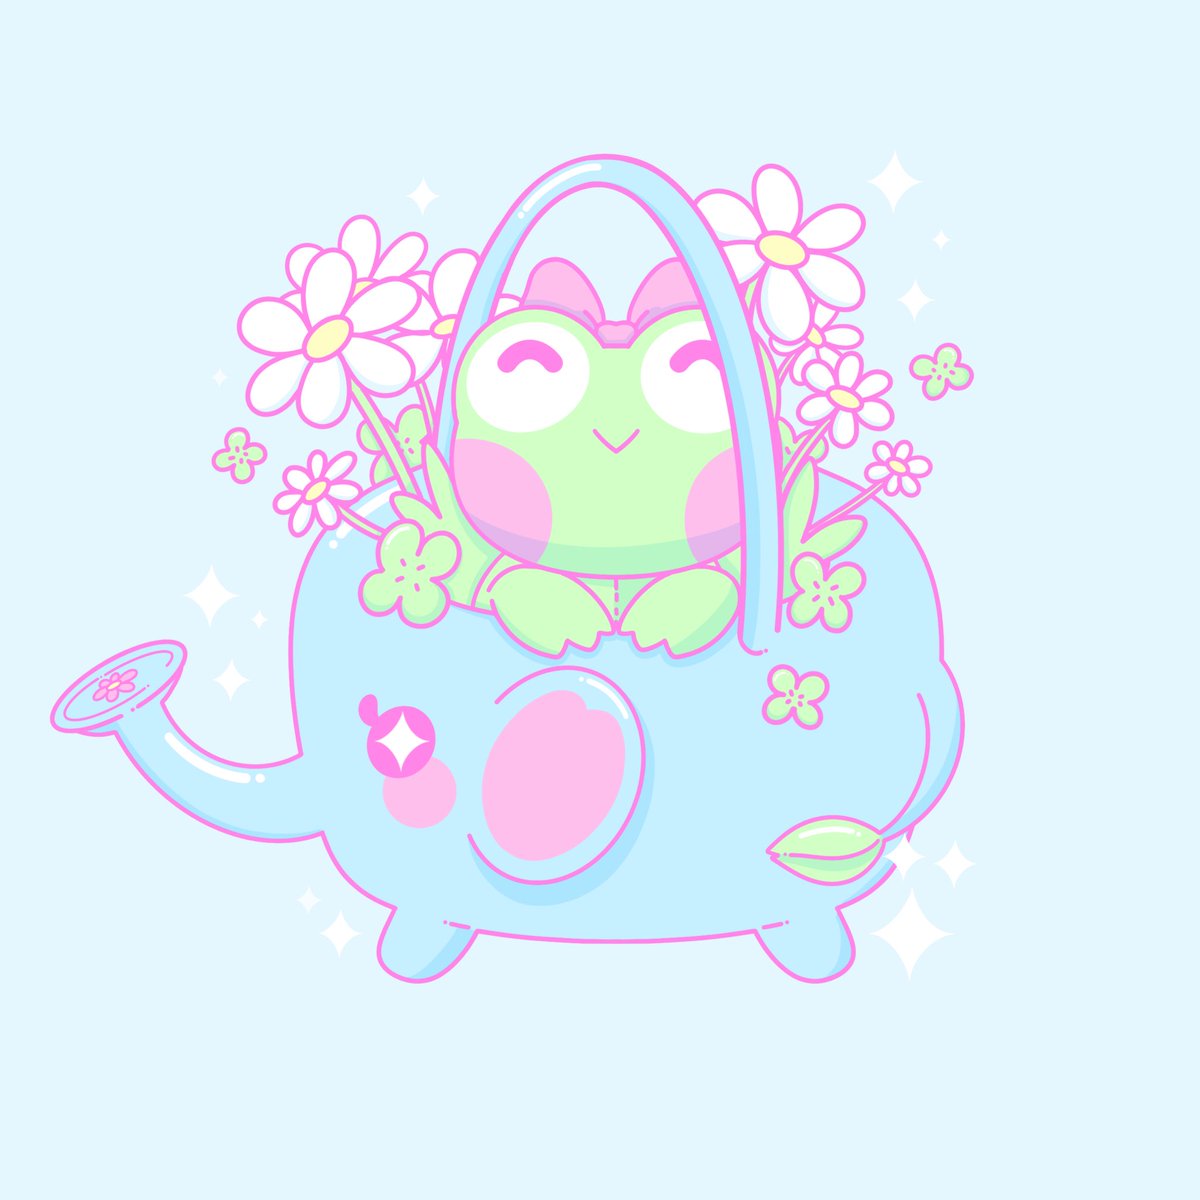 Where would you live if you were a tiny cute frog? 💖🍄
.
#frog #cottagecore #elephantwateringcan #froggy #daisy #flowerfrog #pastelaesthetic #kawaiiart #kawaiiaesthetic #kawaii #kawaiiartist #cute #cuteartwork #cutefrog #frogart